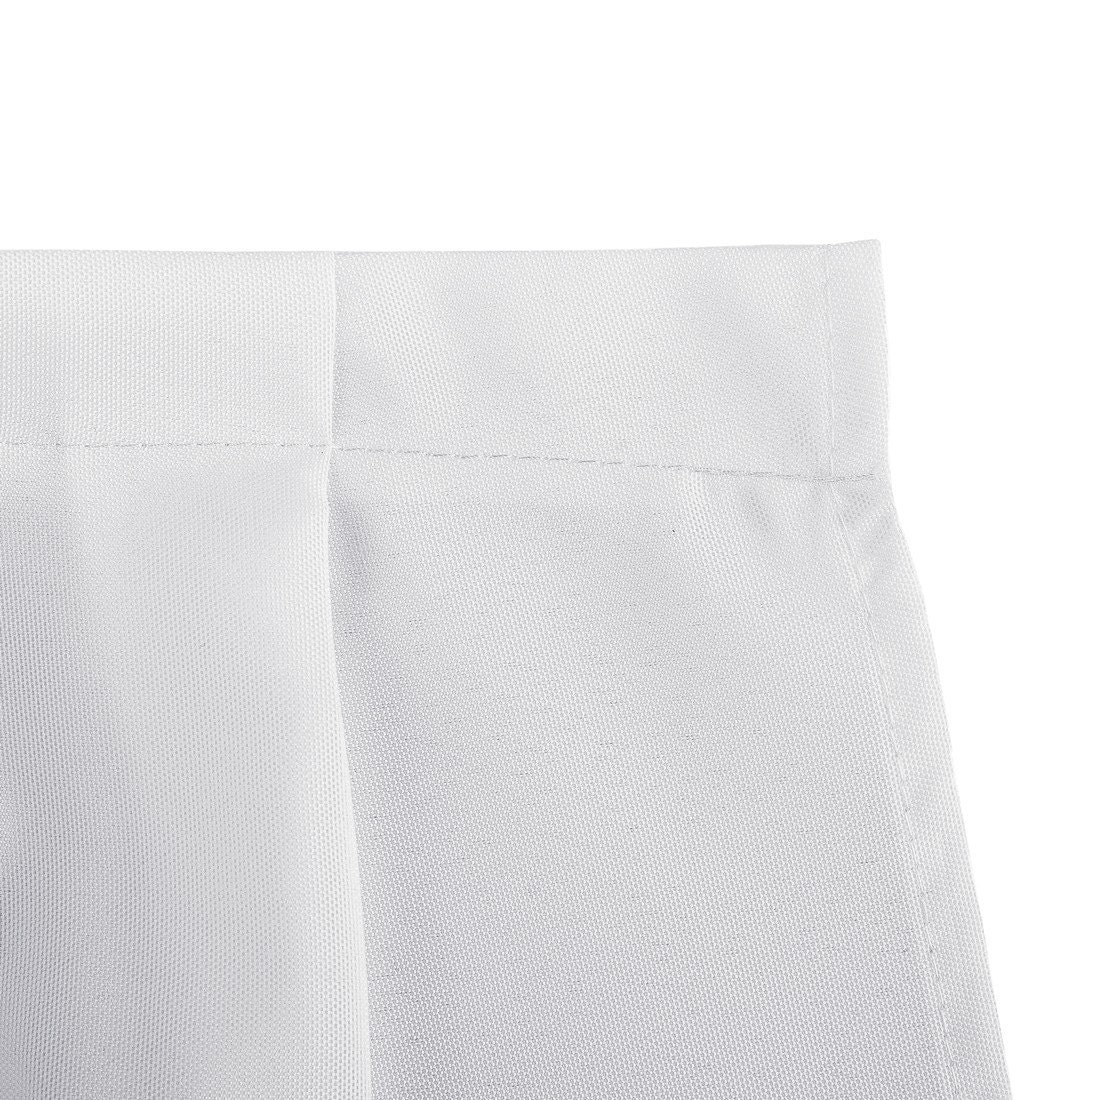 14 ft. Accordion Pleat Polyester Table Skirt White | Etsy